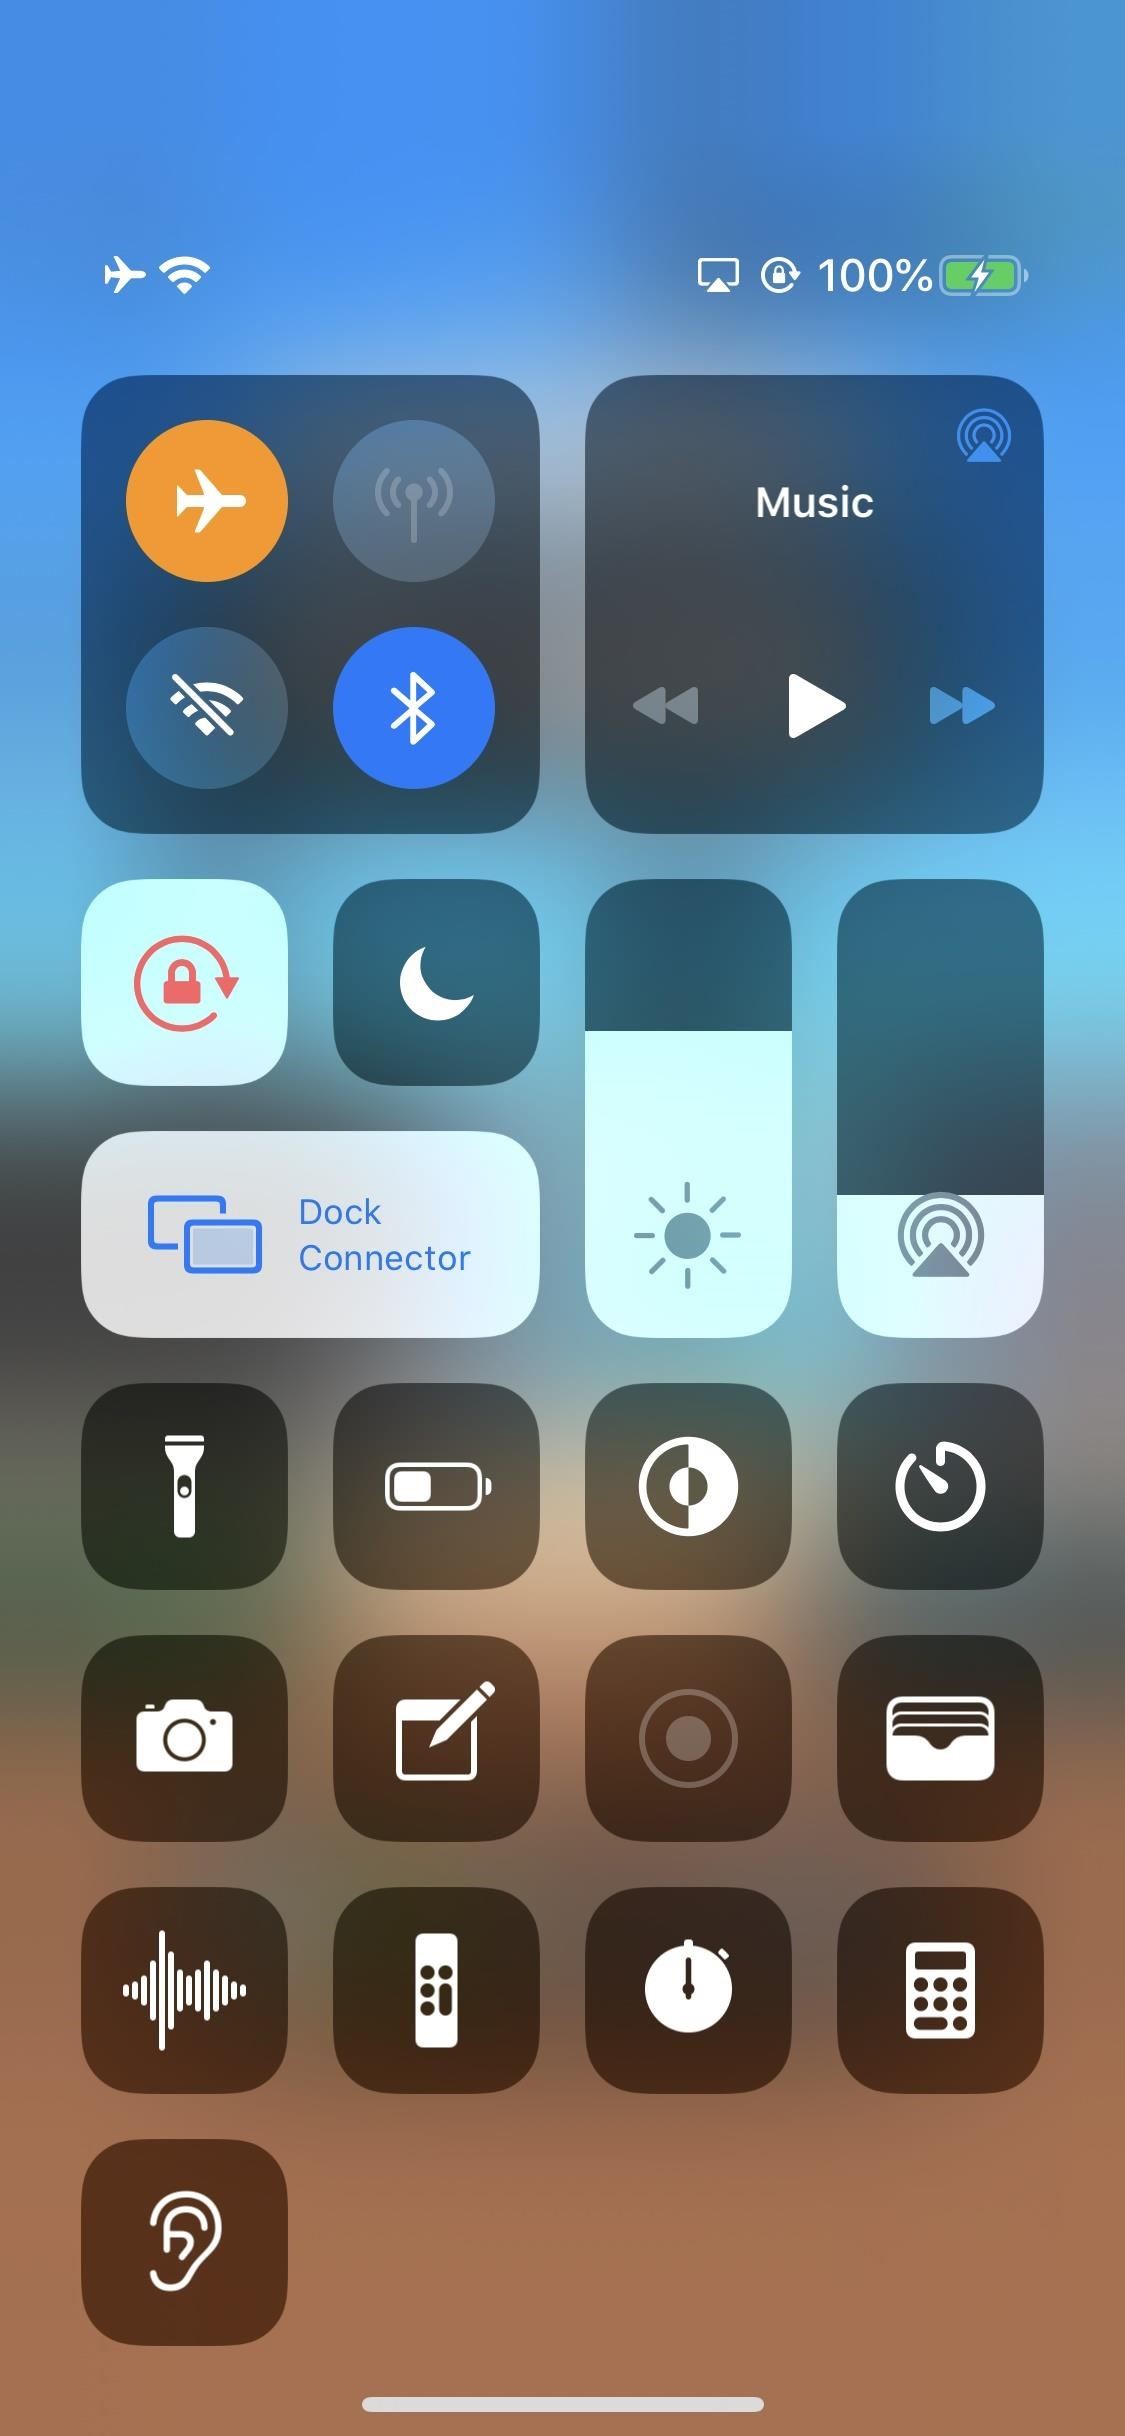 How to Block Ads in Games on Your iPhone for Distraction-Free Gameplay